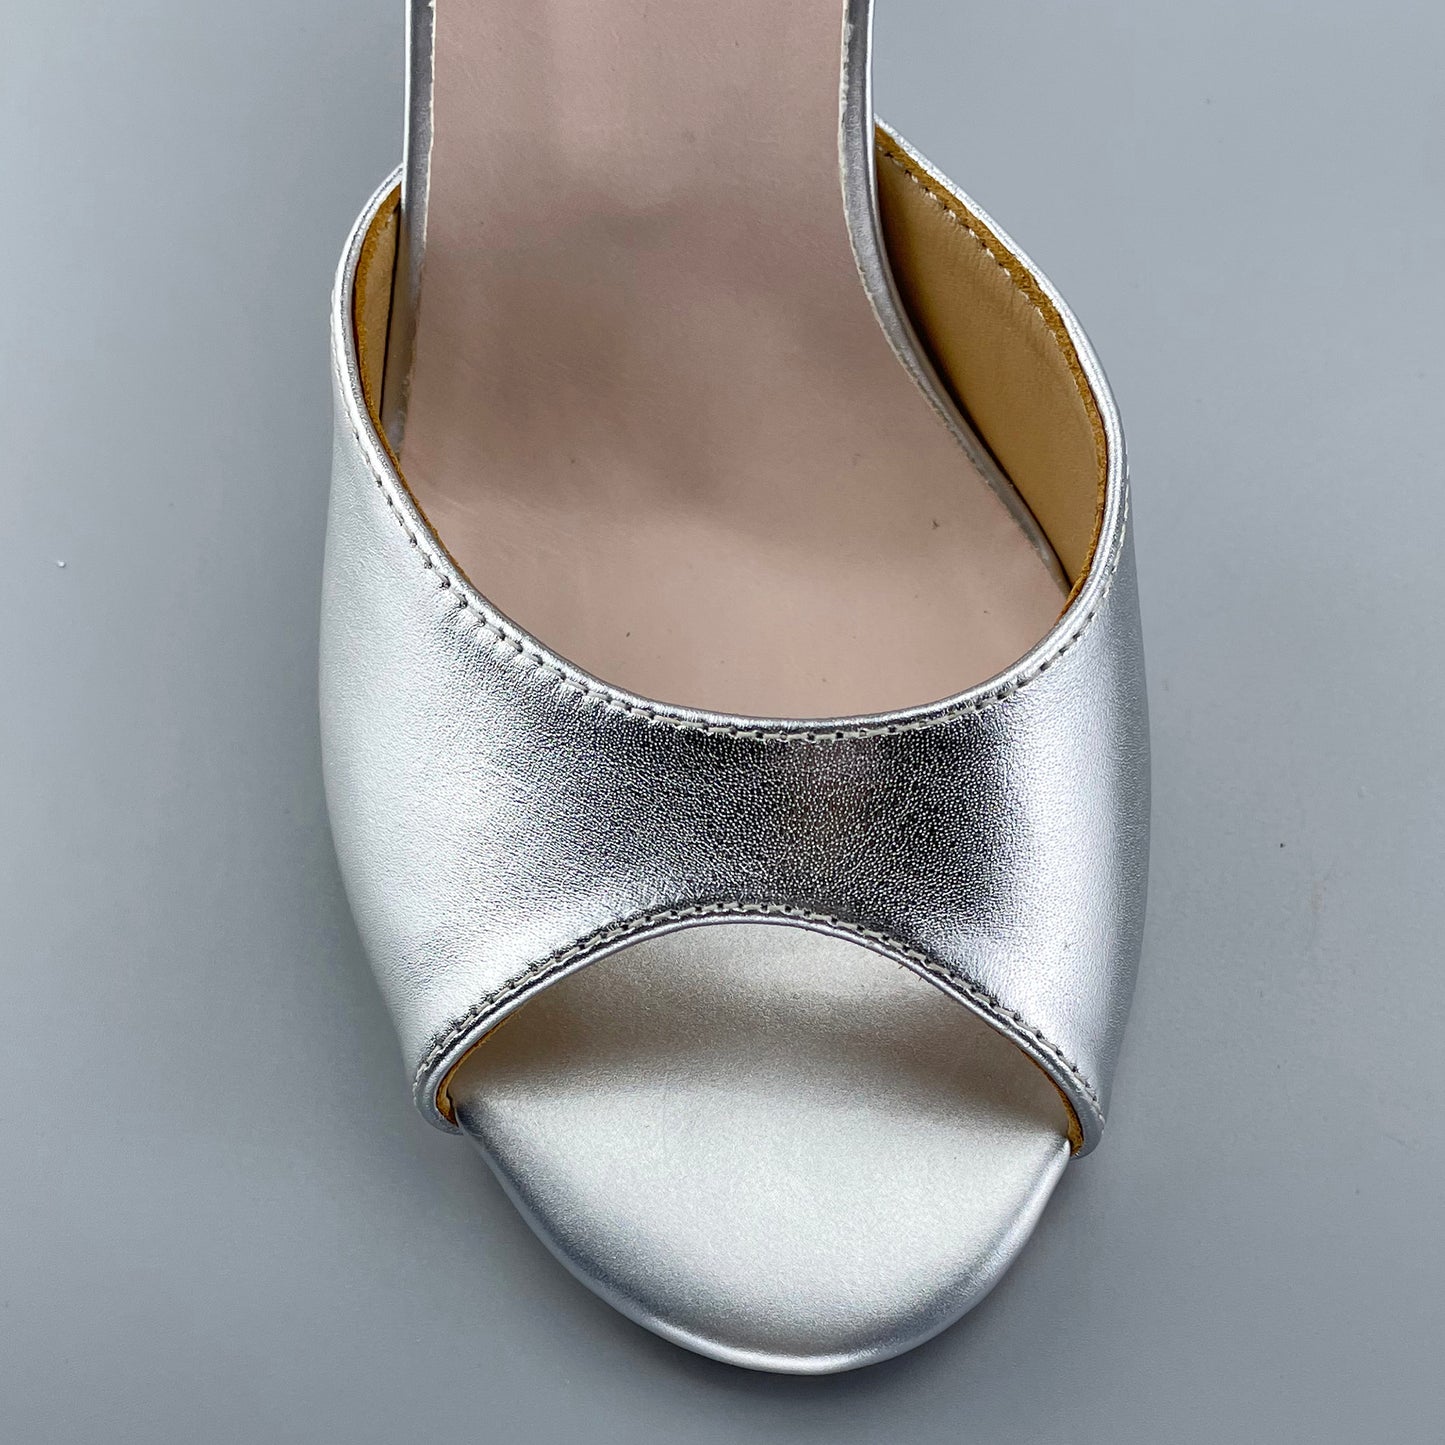 Pro Dancer Open-toe and Closed-back Argentine Tango Shoes High Salsa Heels Hard Leather Sole Sandals Silver (PD-9043A)